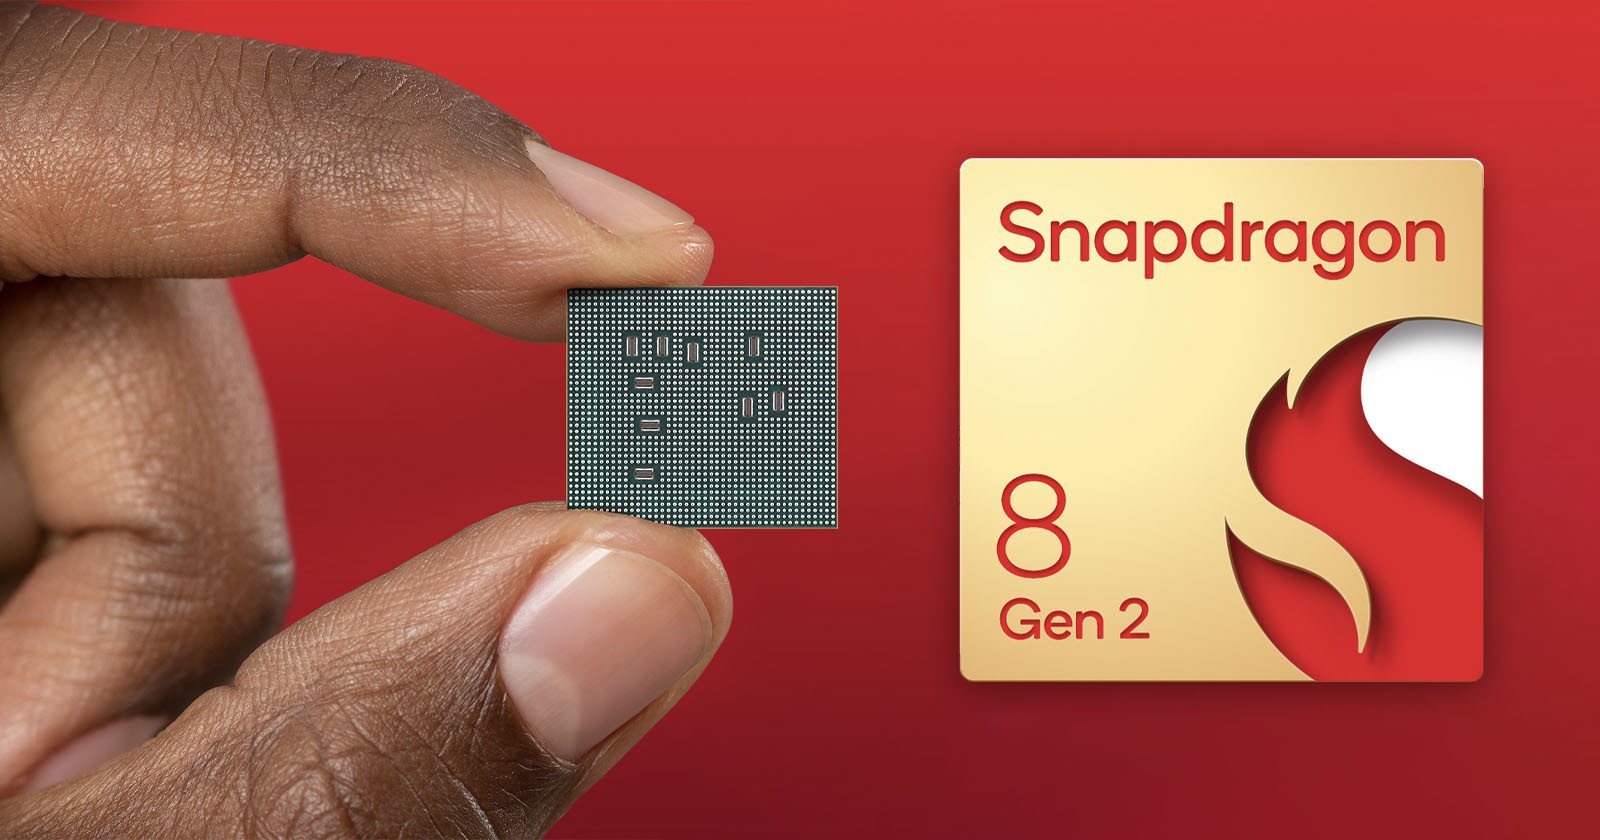  nothing stopping camera makers from using snapdragon chip 